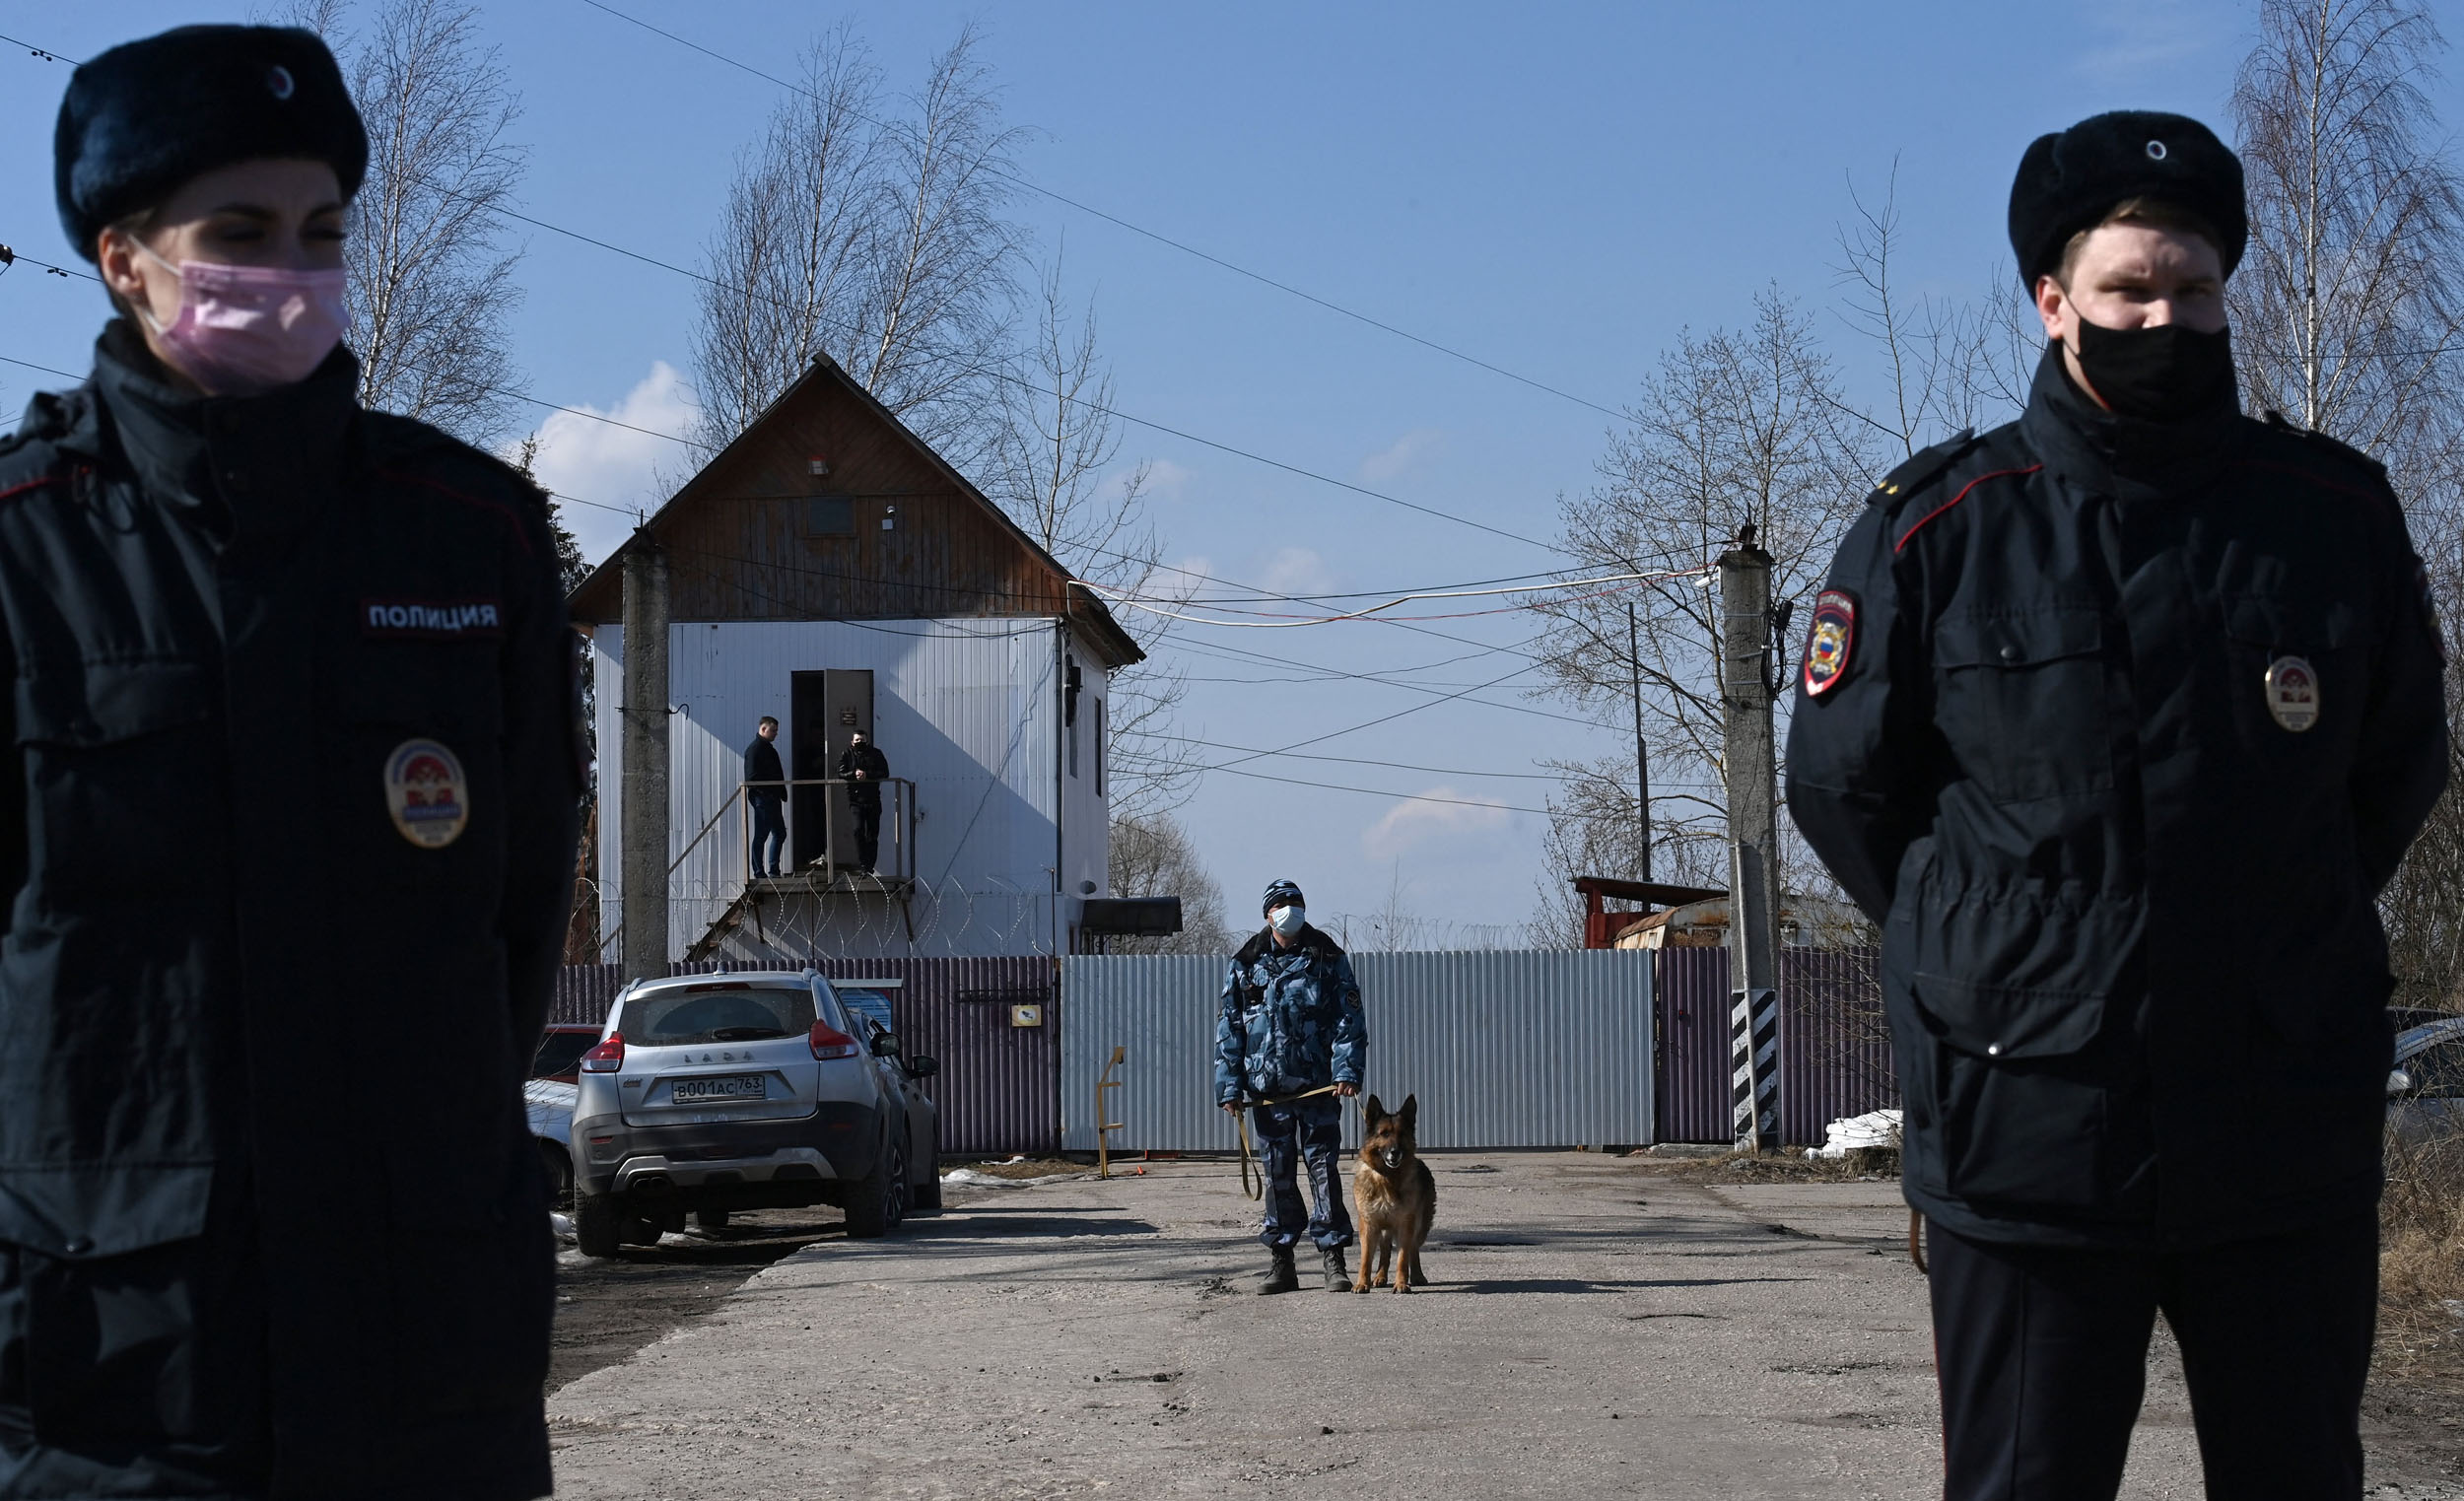 Russian police officers guard the entrance to the penal colony N2, where Kremlin critic Alexei Navalny has been transferred to serve a two-and-a-half year prison term for violating parole, in the town of Pokrov on April 6, 2021. - The Alliance of Doctors medical trade union said it would organise a protest outside the penal colony in Pokrov on Tuesday, demanding Navalny receive adequate medical treatment. (Photo by Kirill KUDRYAVTSEV / AFP)